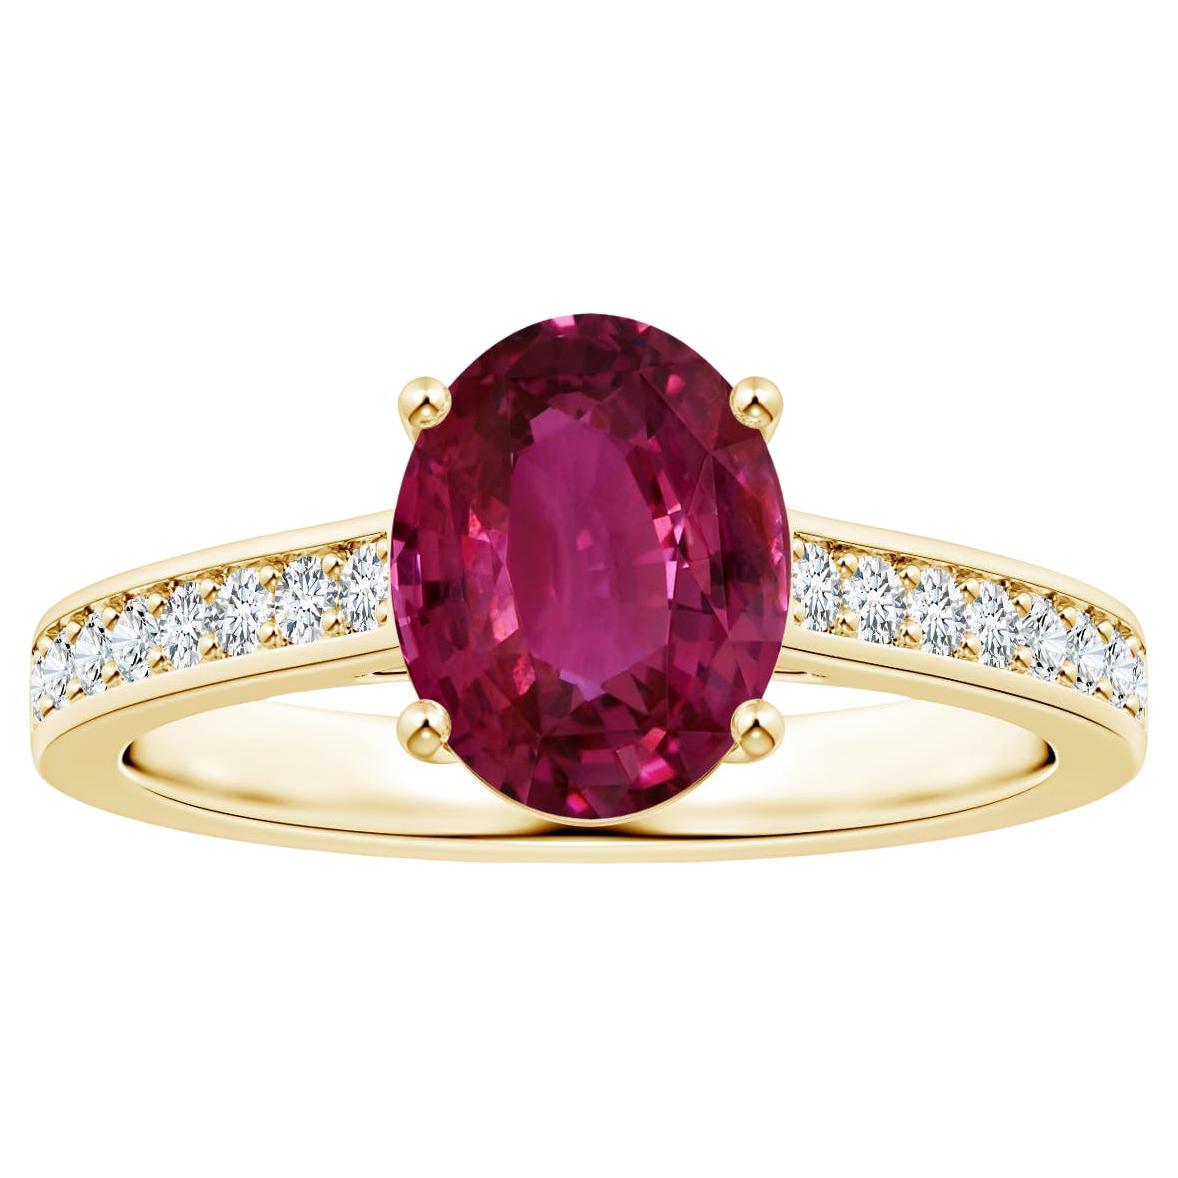 For Sale:  ANGARA Prong-Set GIA Certified Pink Sapphire Ring in Yellow Gold with Diamonds